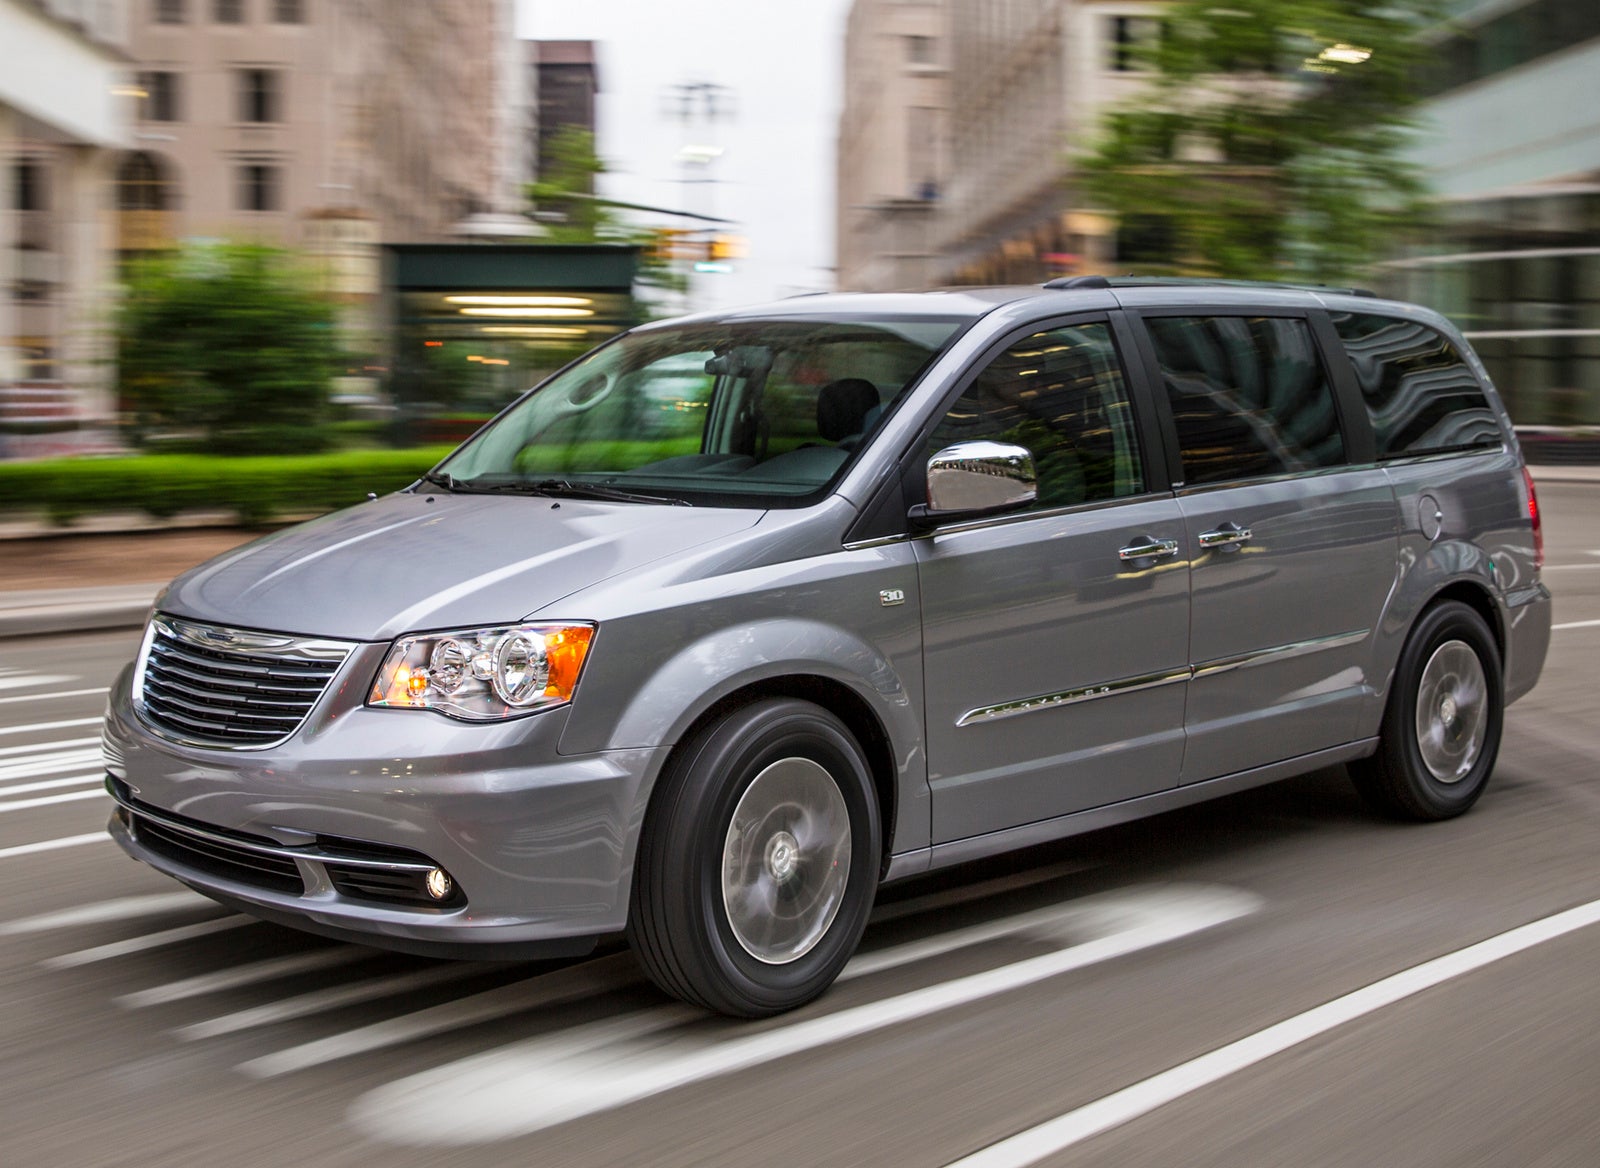 2014 Chrysler Town & Country Test Drive Review CarGurus